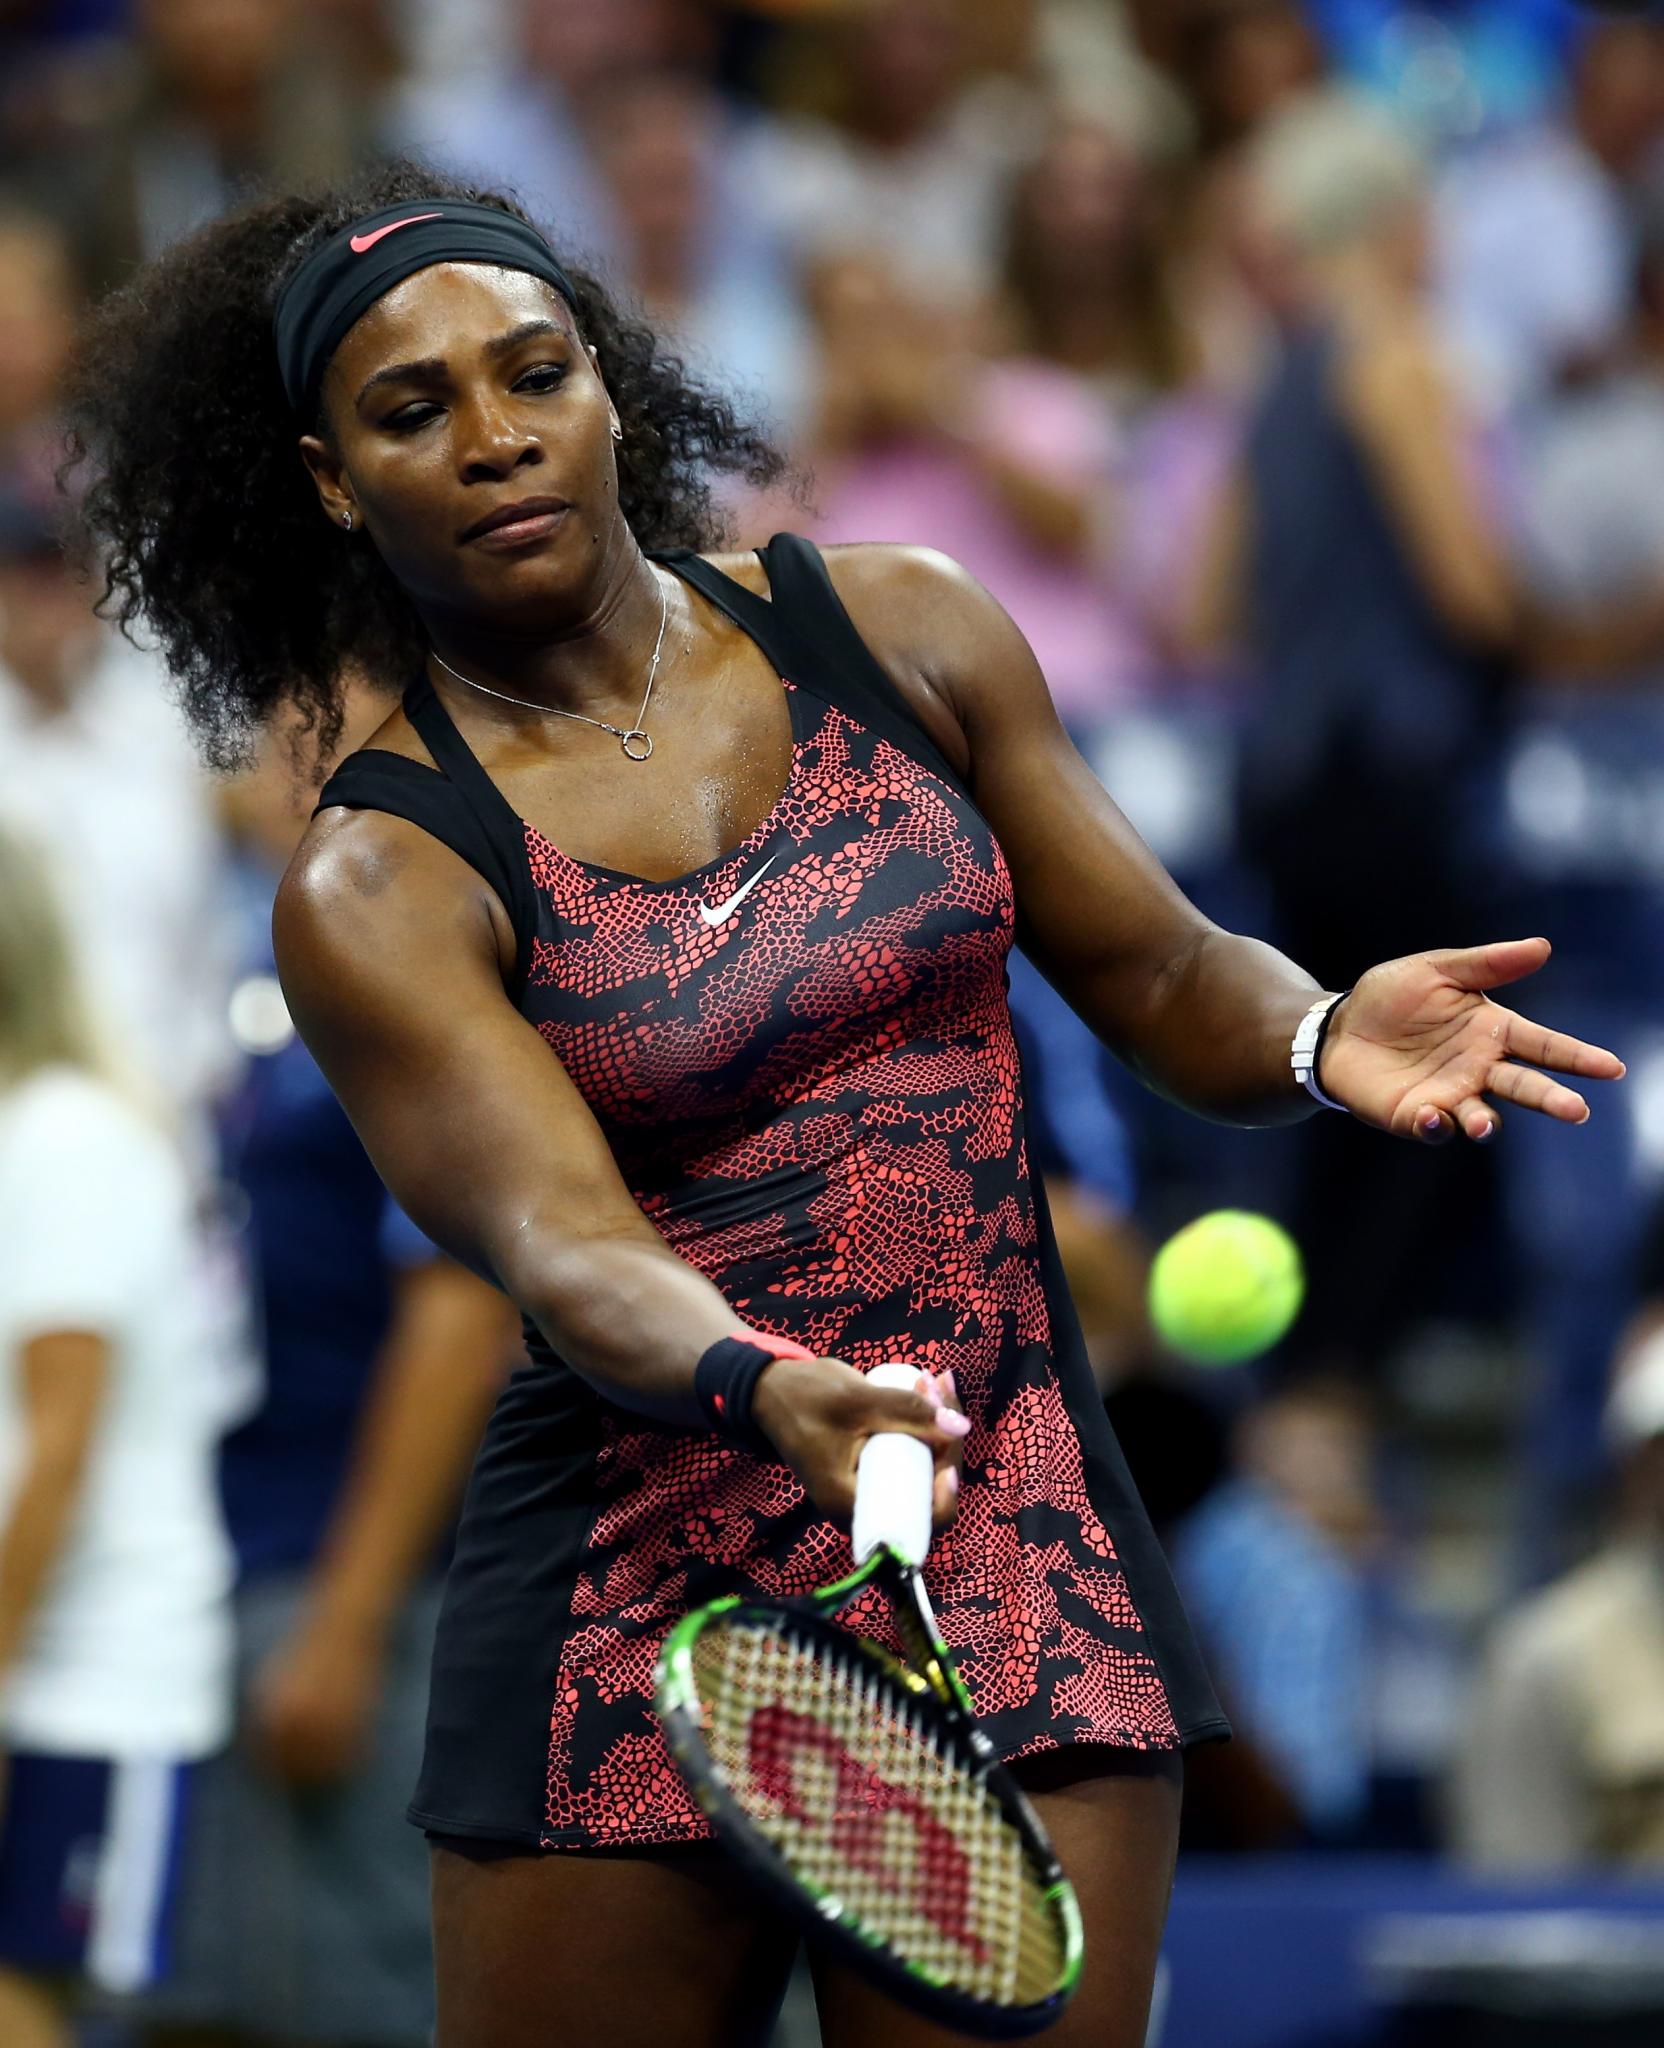 Serena Williams Ends Season Early to Focus on Her Health